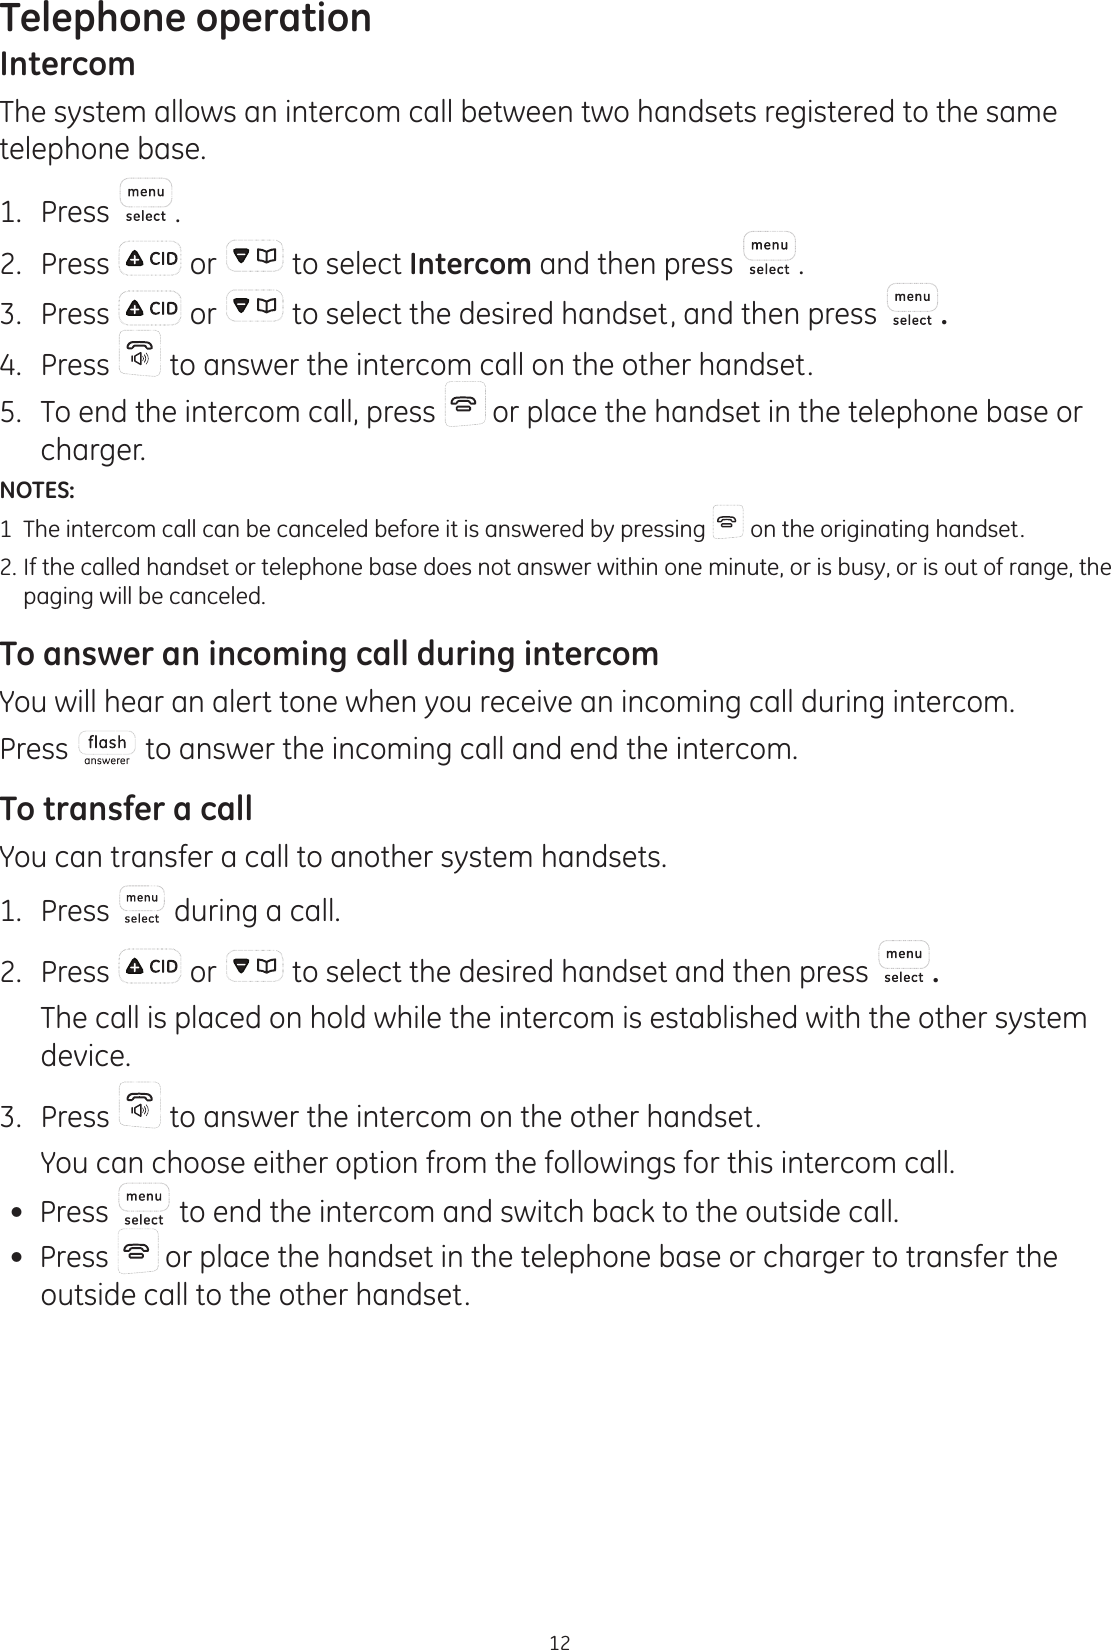 Telephone operation12IntercomThe system allows an intercom call between two handsets registered to the same telephone base.1.  Press .2.  Press   or   to select Intercom and then press  .3.  Press   or   to select the desired handset, and then press  .4.  Press   to answer the intercom call on the other handset.5.  To end the intercom call, press   or place the handset in the telephone base or charger.    NOTES: 1  The intercom call can be canceled before it is answered by pressing   on the originating handset.2.  If the called handset or telephone base does not answer within one minute, or is busy, or is out of range, the    paging will be canceled.To answer an incoming call during intercomYou will hear an alert tone when you receive an incoming call during intercom.Press   to answer the incoming call and end the intercom. To transfer a callYou can transfer a call to another system handsets.1.  Press   during a call. 2.  Press   or   to select the desired handset and then press  .   The call is placed on hold while the intercom is established with the other system device.3.  Press   to answer the intercom on the other handset.   You can choose either option from the followings for this intercom call. Press   to end the intercom and switch back to the outside call. Press   or place the handset in the telephone base or charger to transfer the outside call to the other handset.